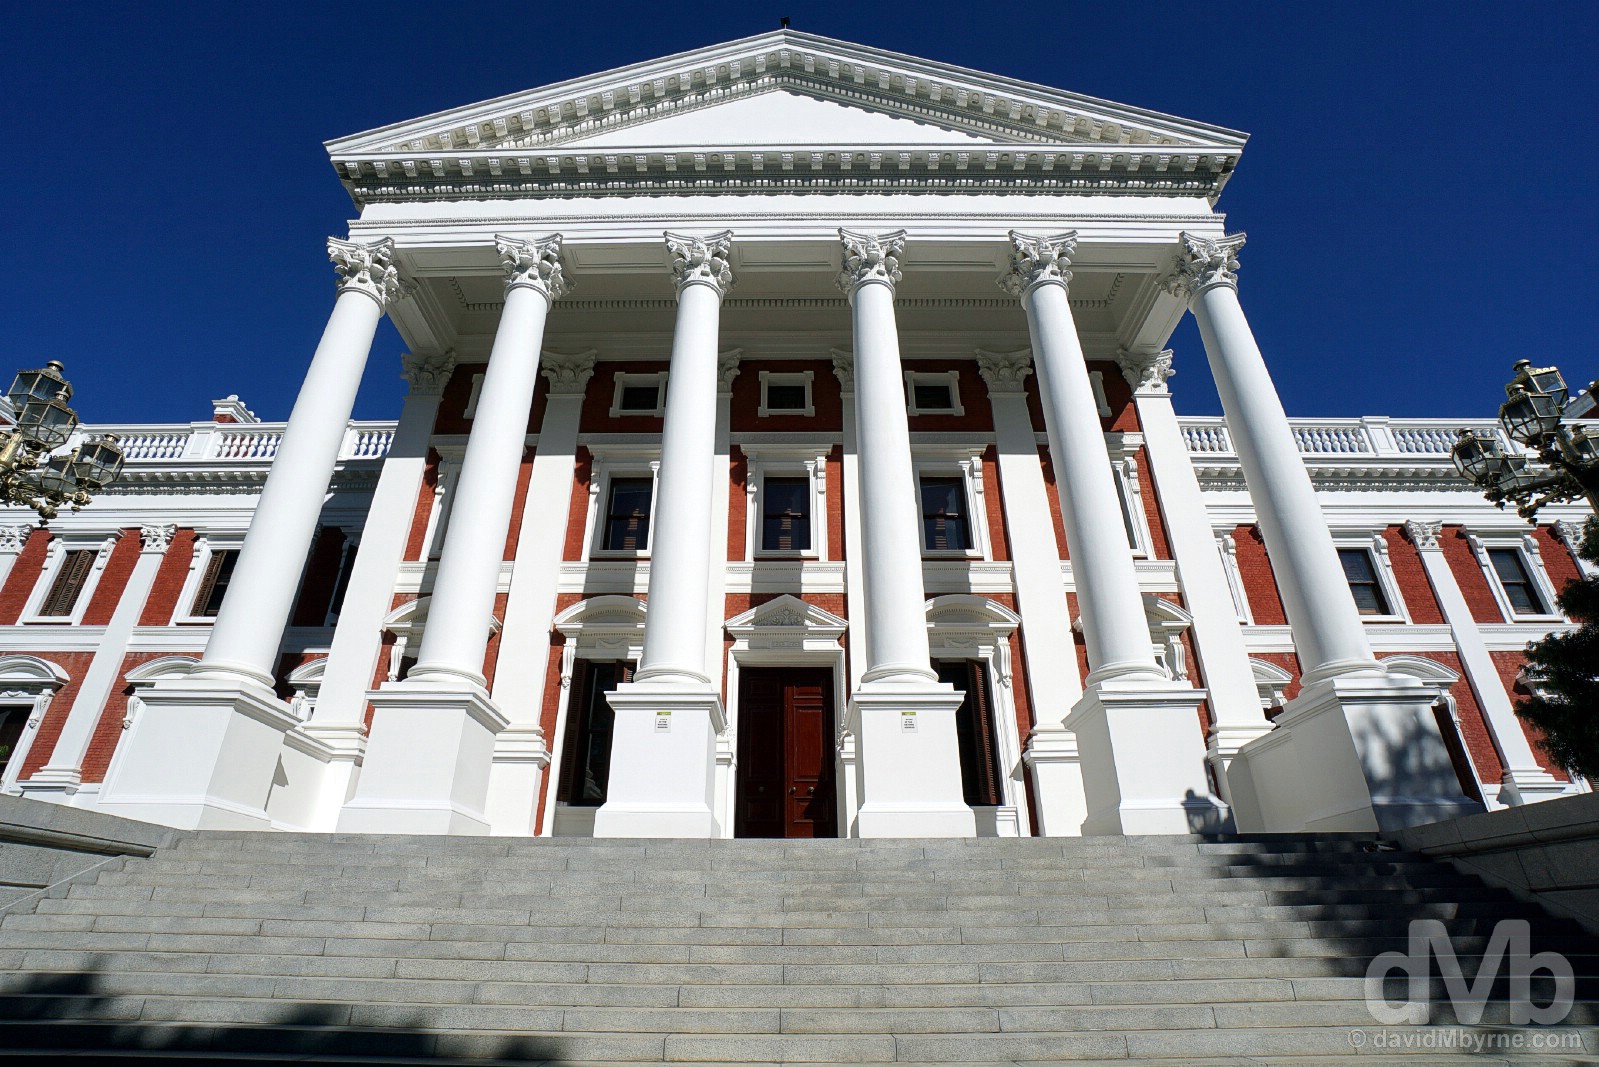 King's Gallery, Parliament Buildings, Government Avenue, Cape Town, Western Cape, South Africa. February 16, 2017.